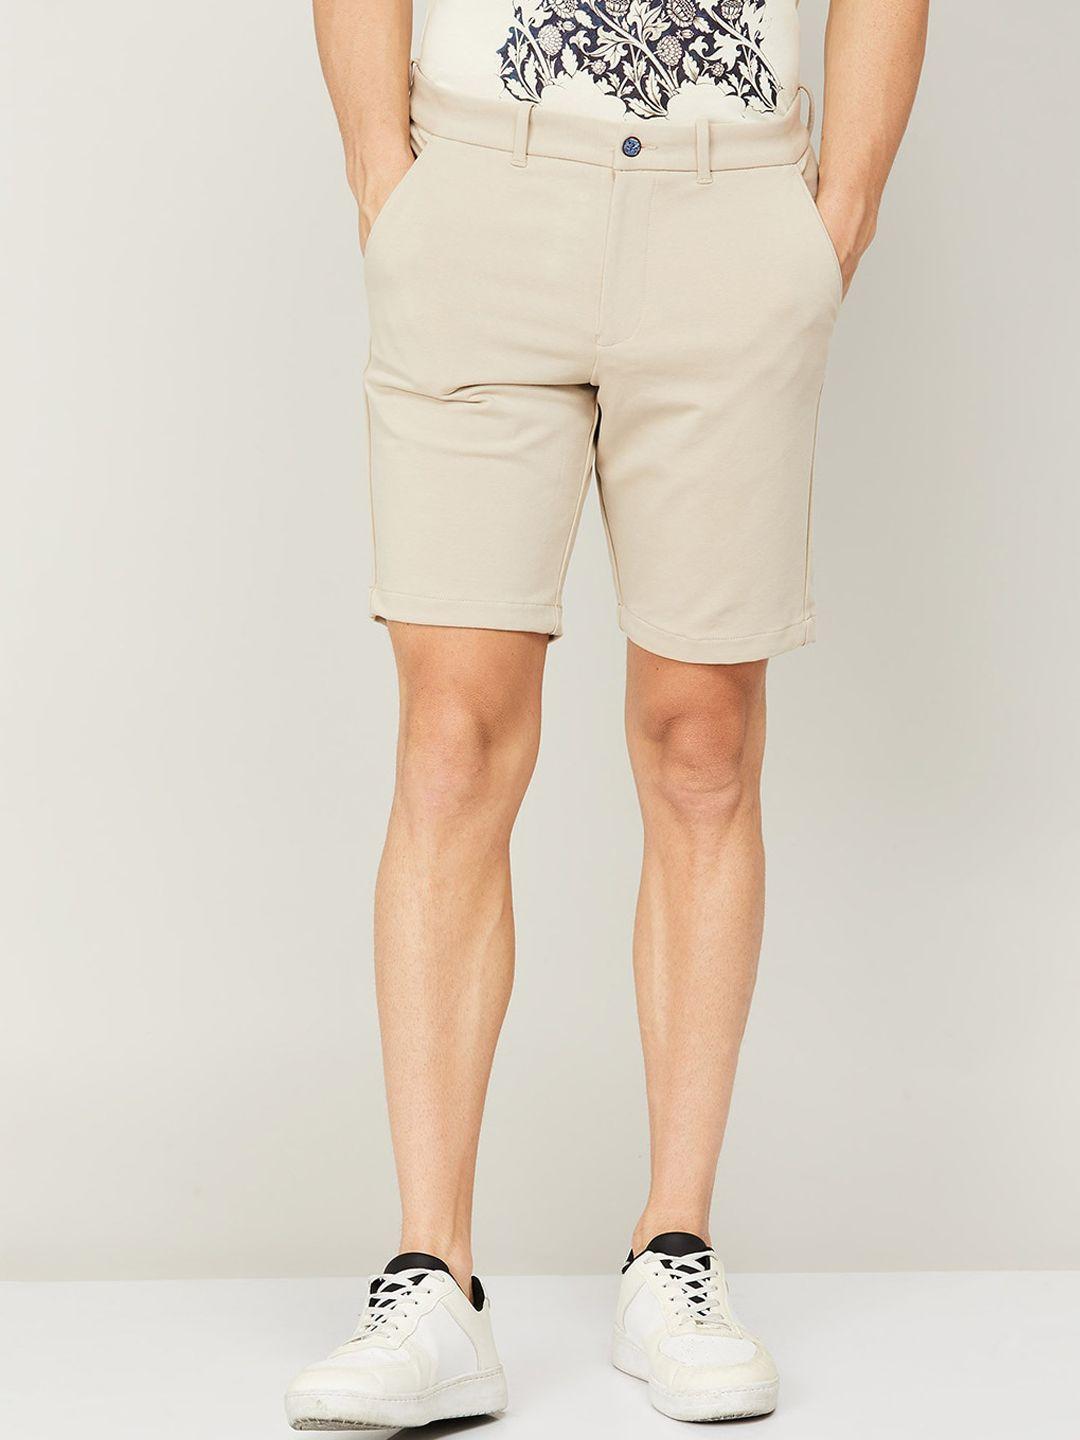 code by lifestyle men mid-rise above knee length shorts